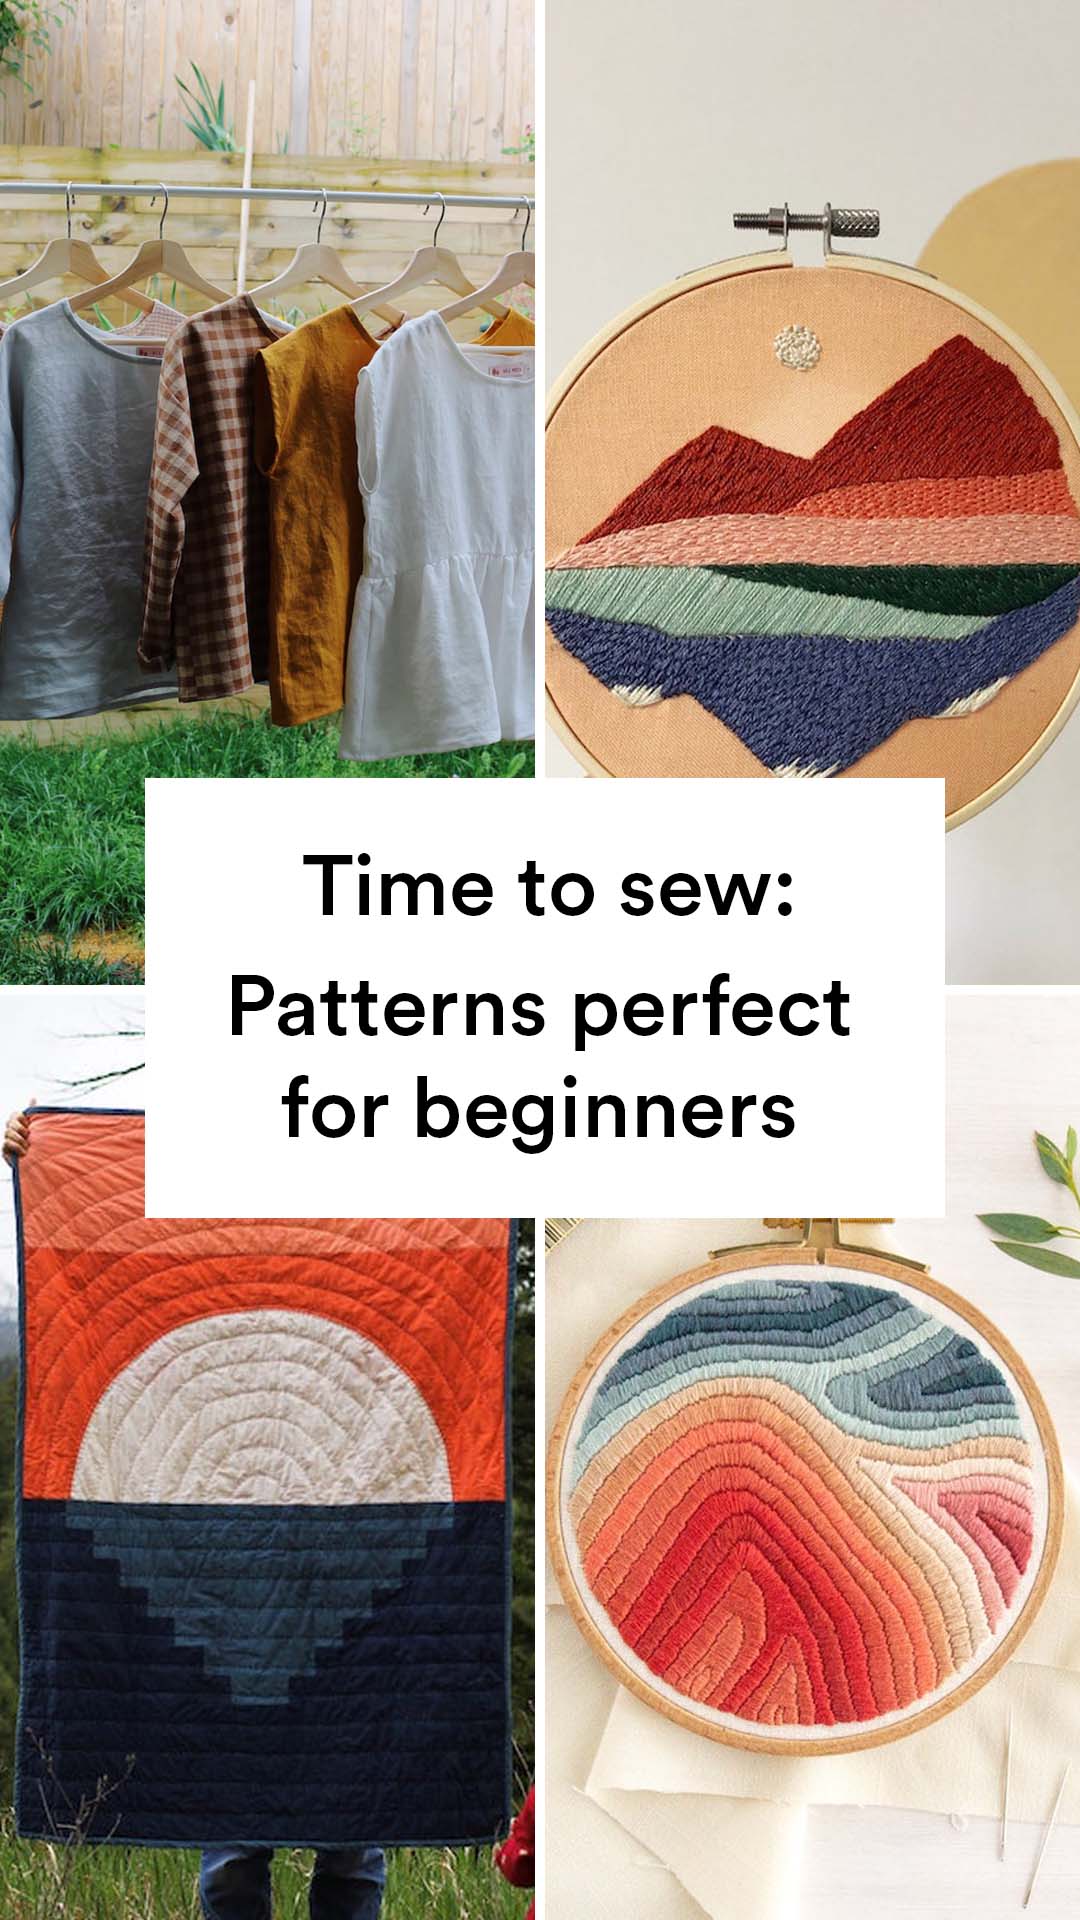 Stitching Patterns Perfect for Beginners